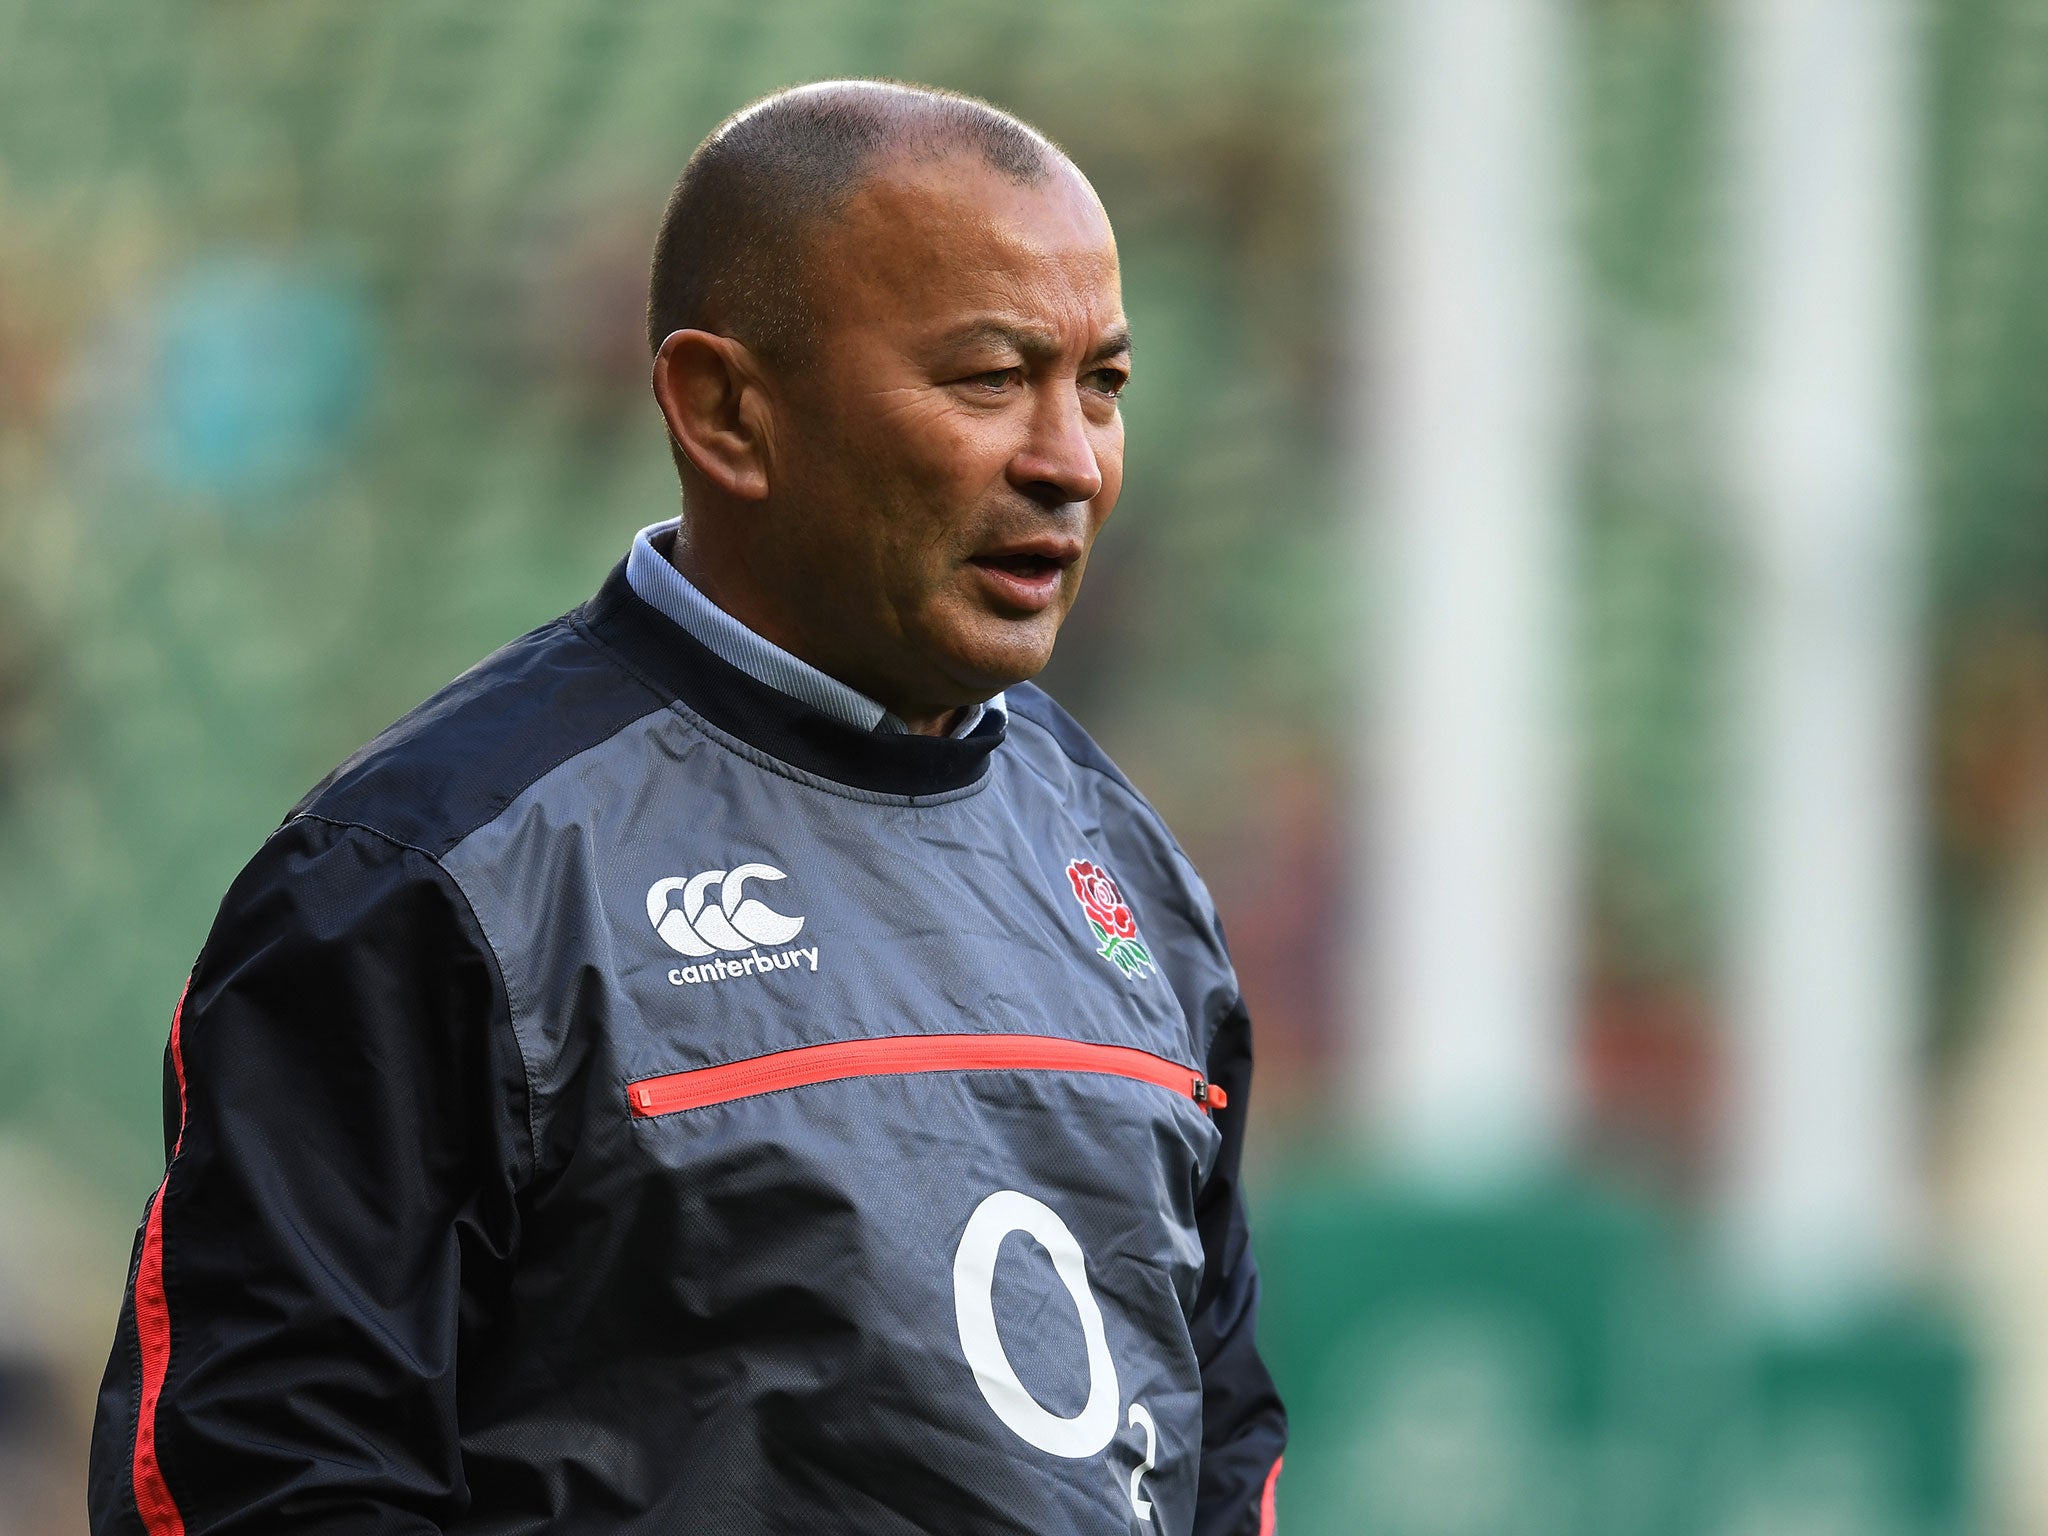 The Six Nations gets under way on February 4, with England opening the tournament against France at Twickenham